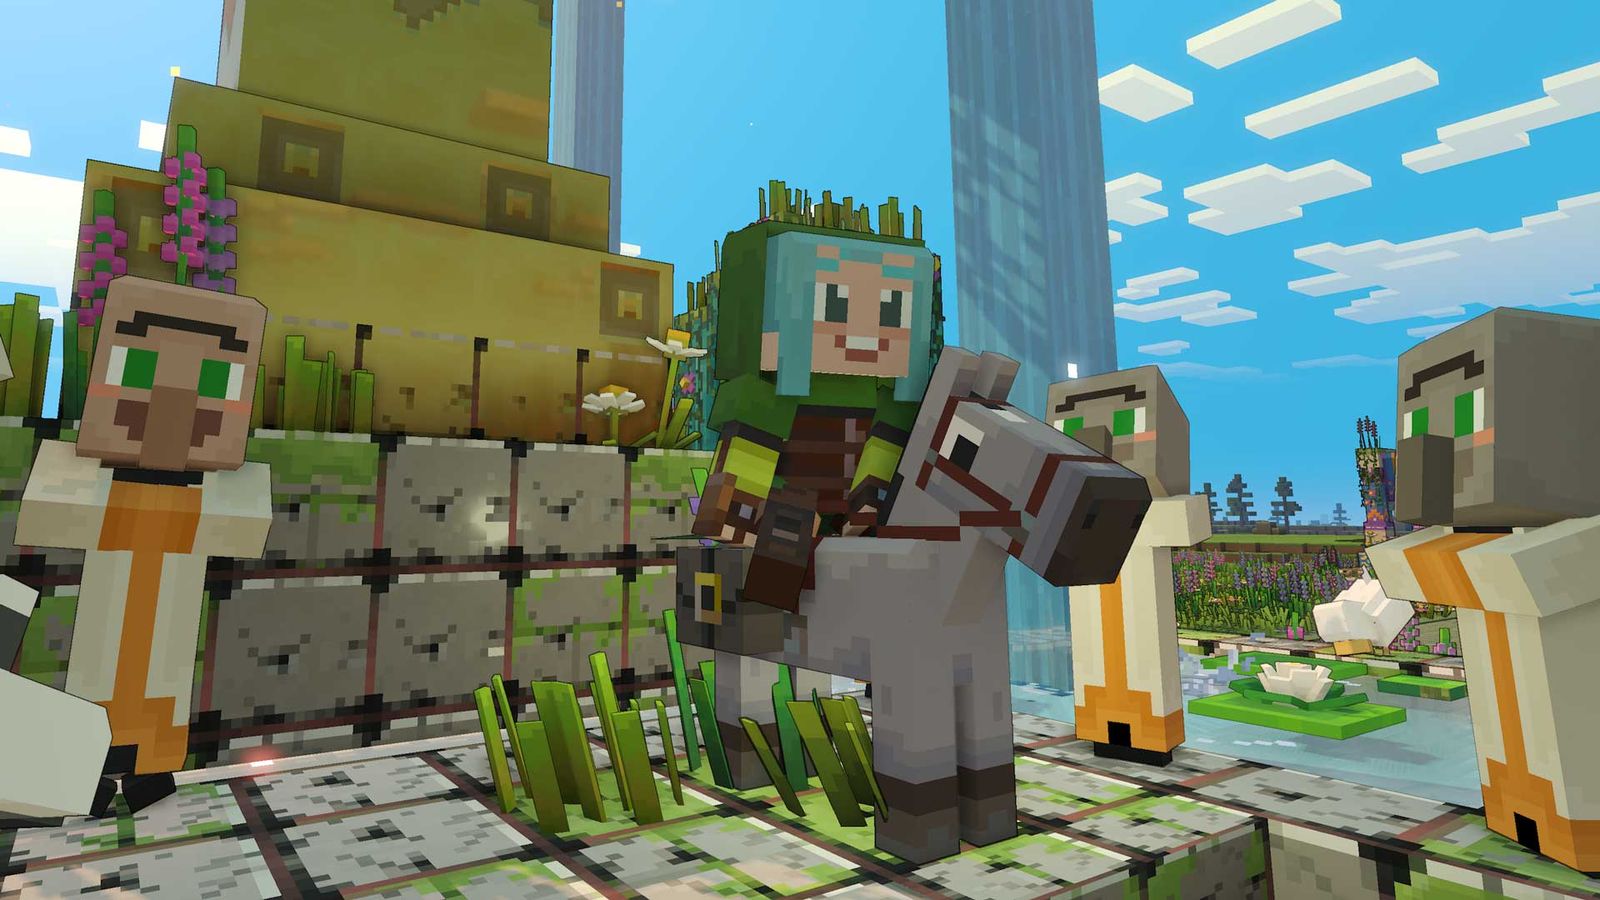 The character and multiple villagers in Minecraft Legends.